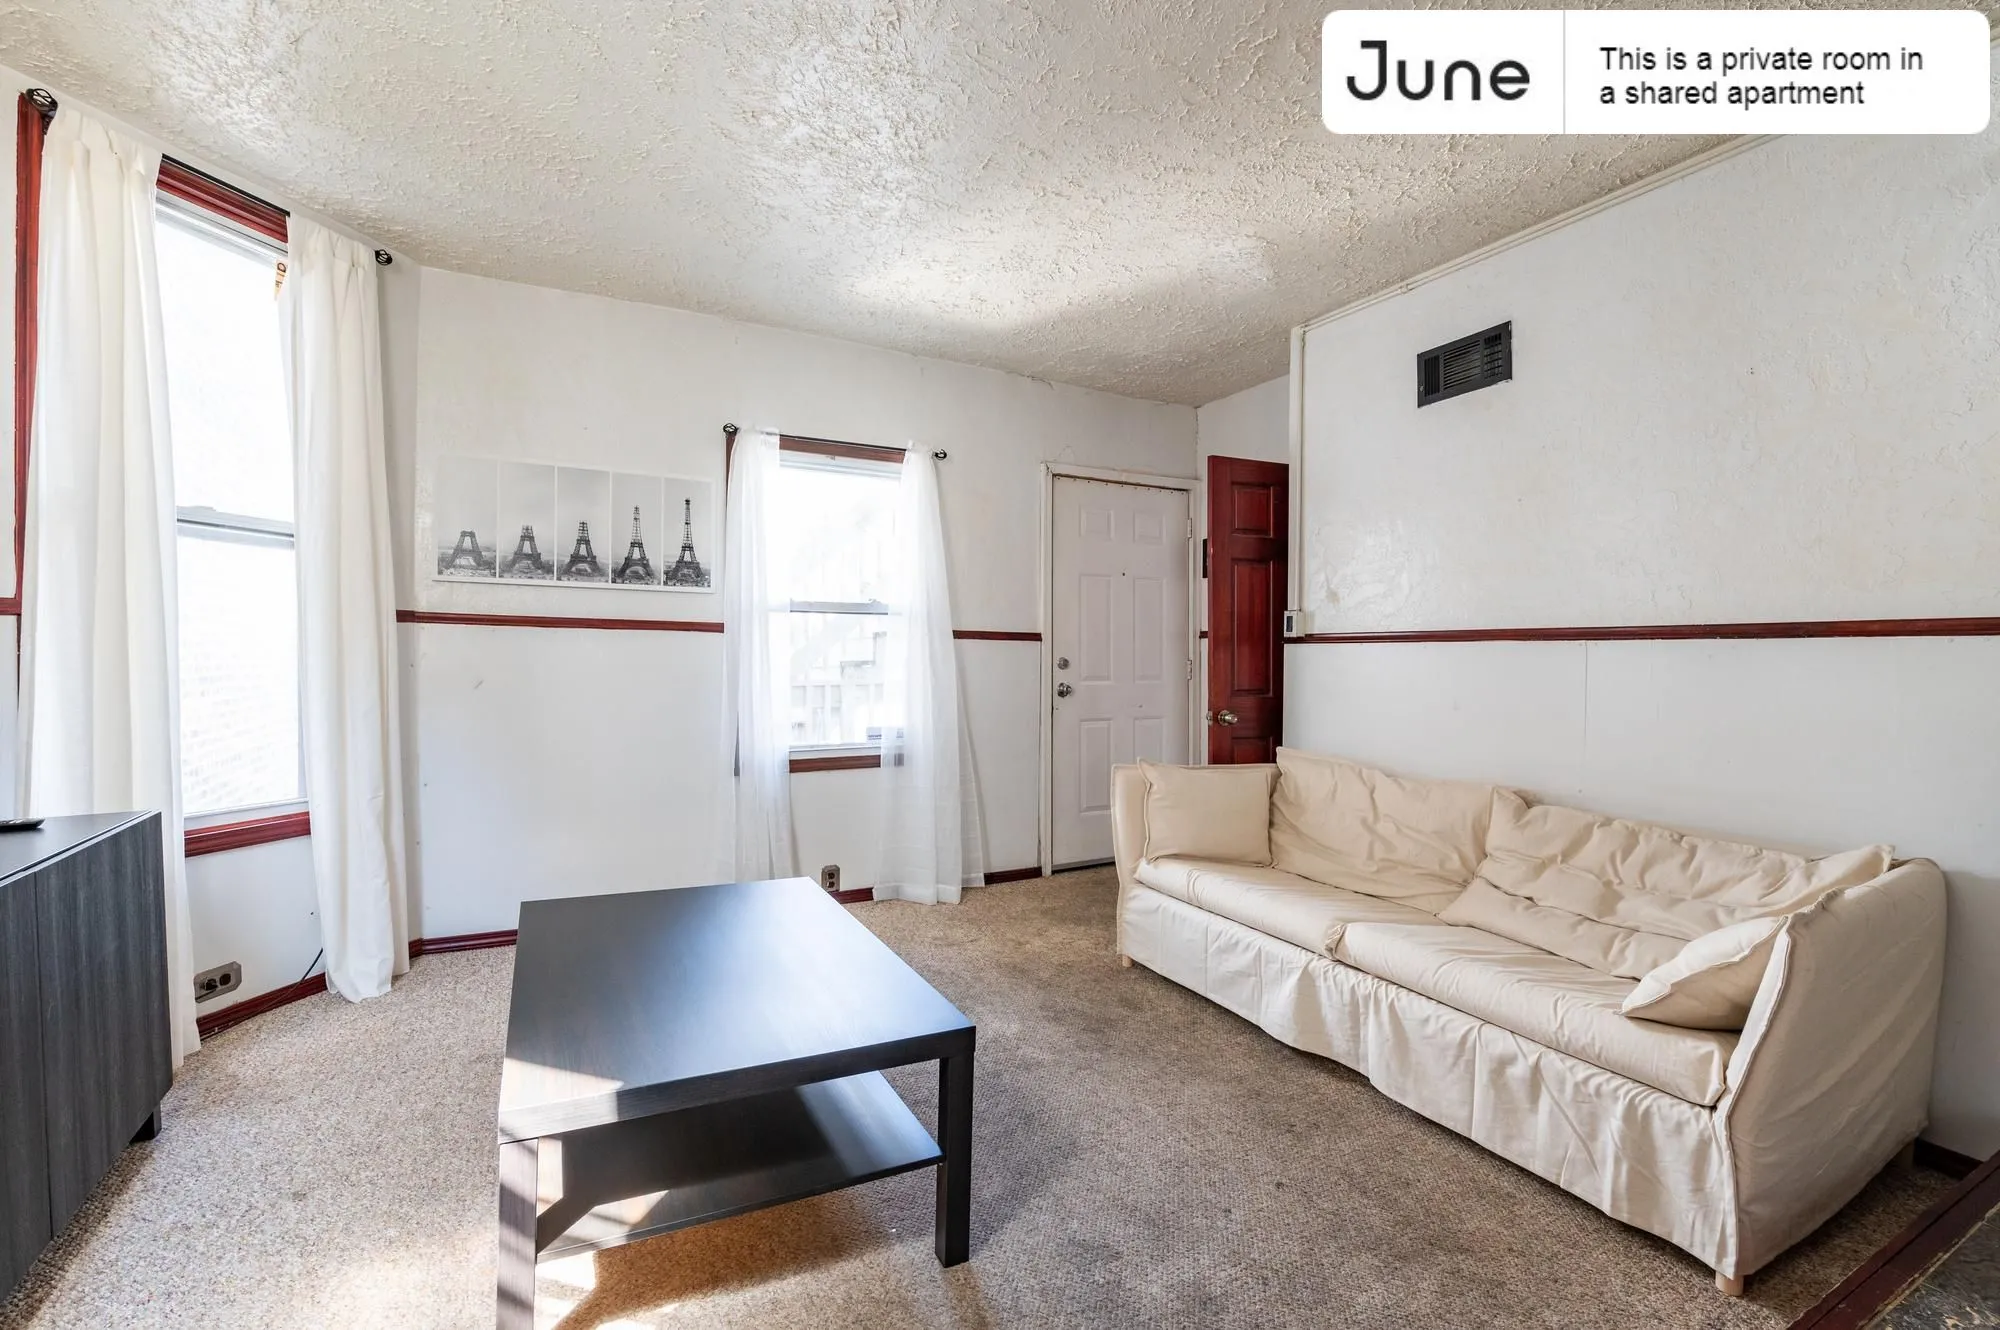 3922 N ASHLAND AVE 60613-Room For Rent-unit#002r-Chicago-IL